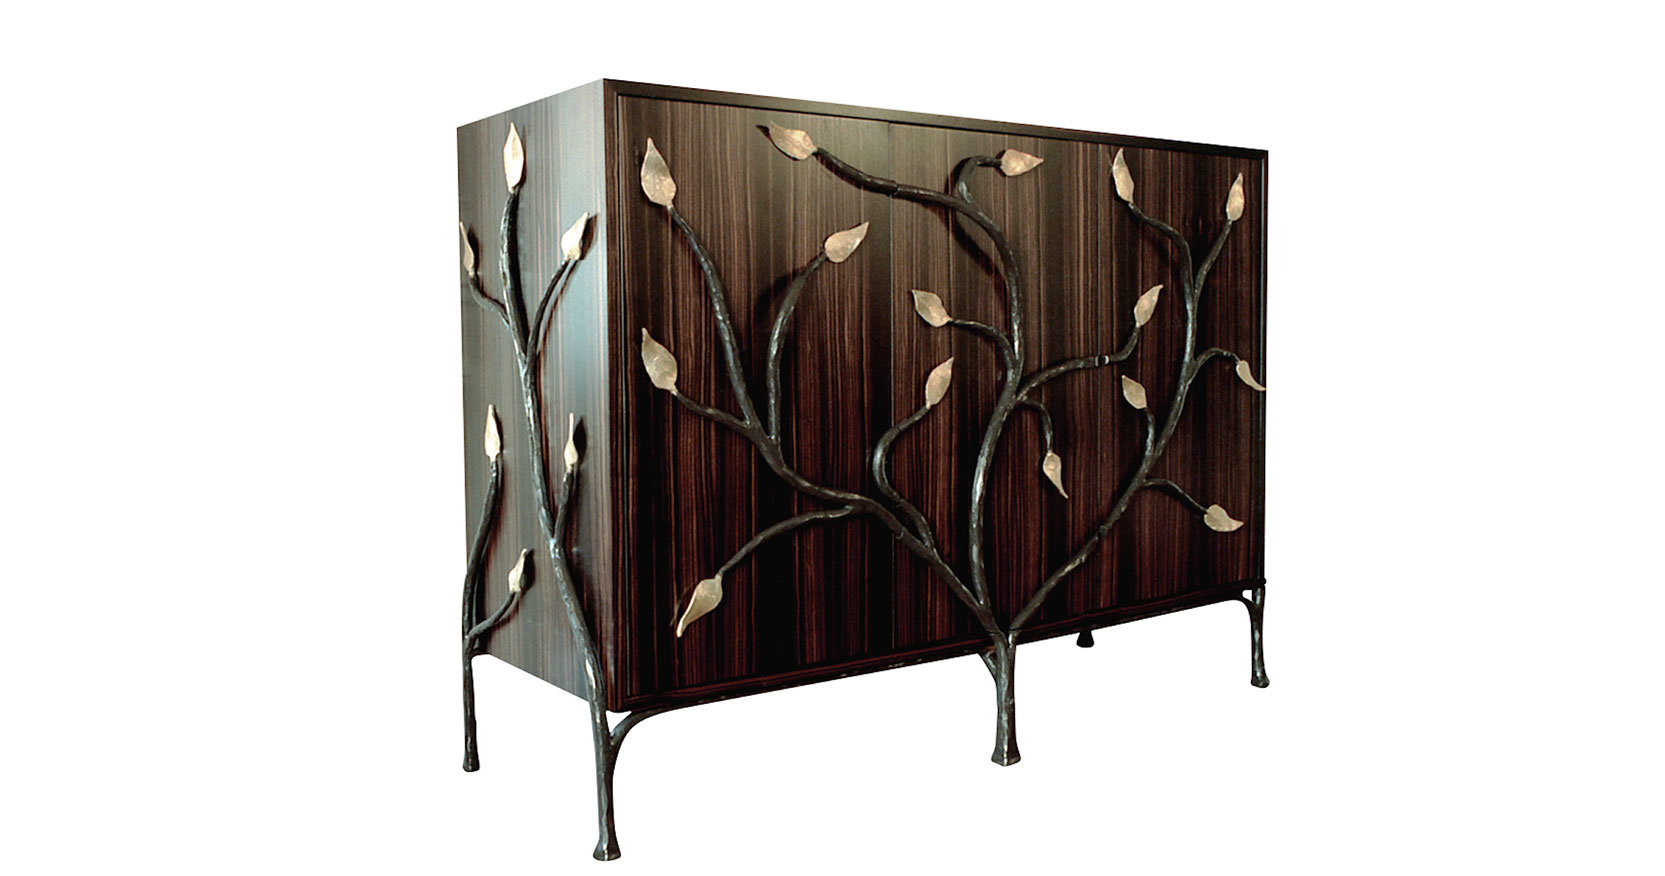 Garouste Bonetti, spectacular ebony sideboard surrounded by black wrought iron branches with gold leaves